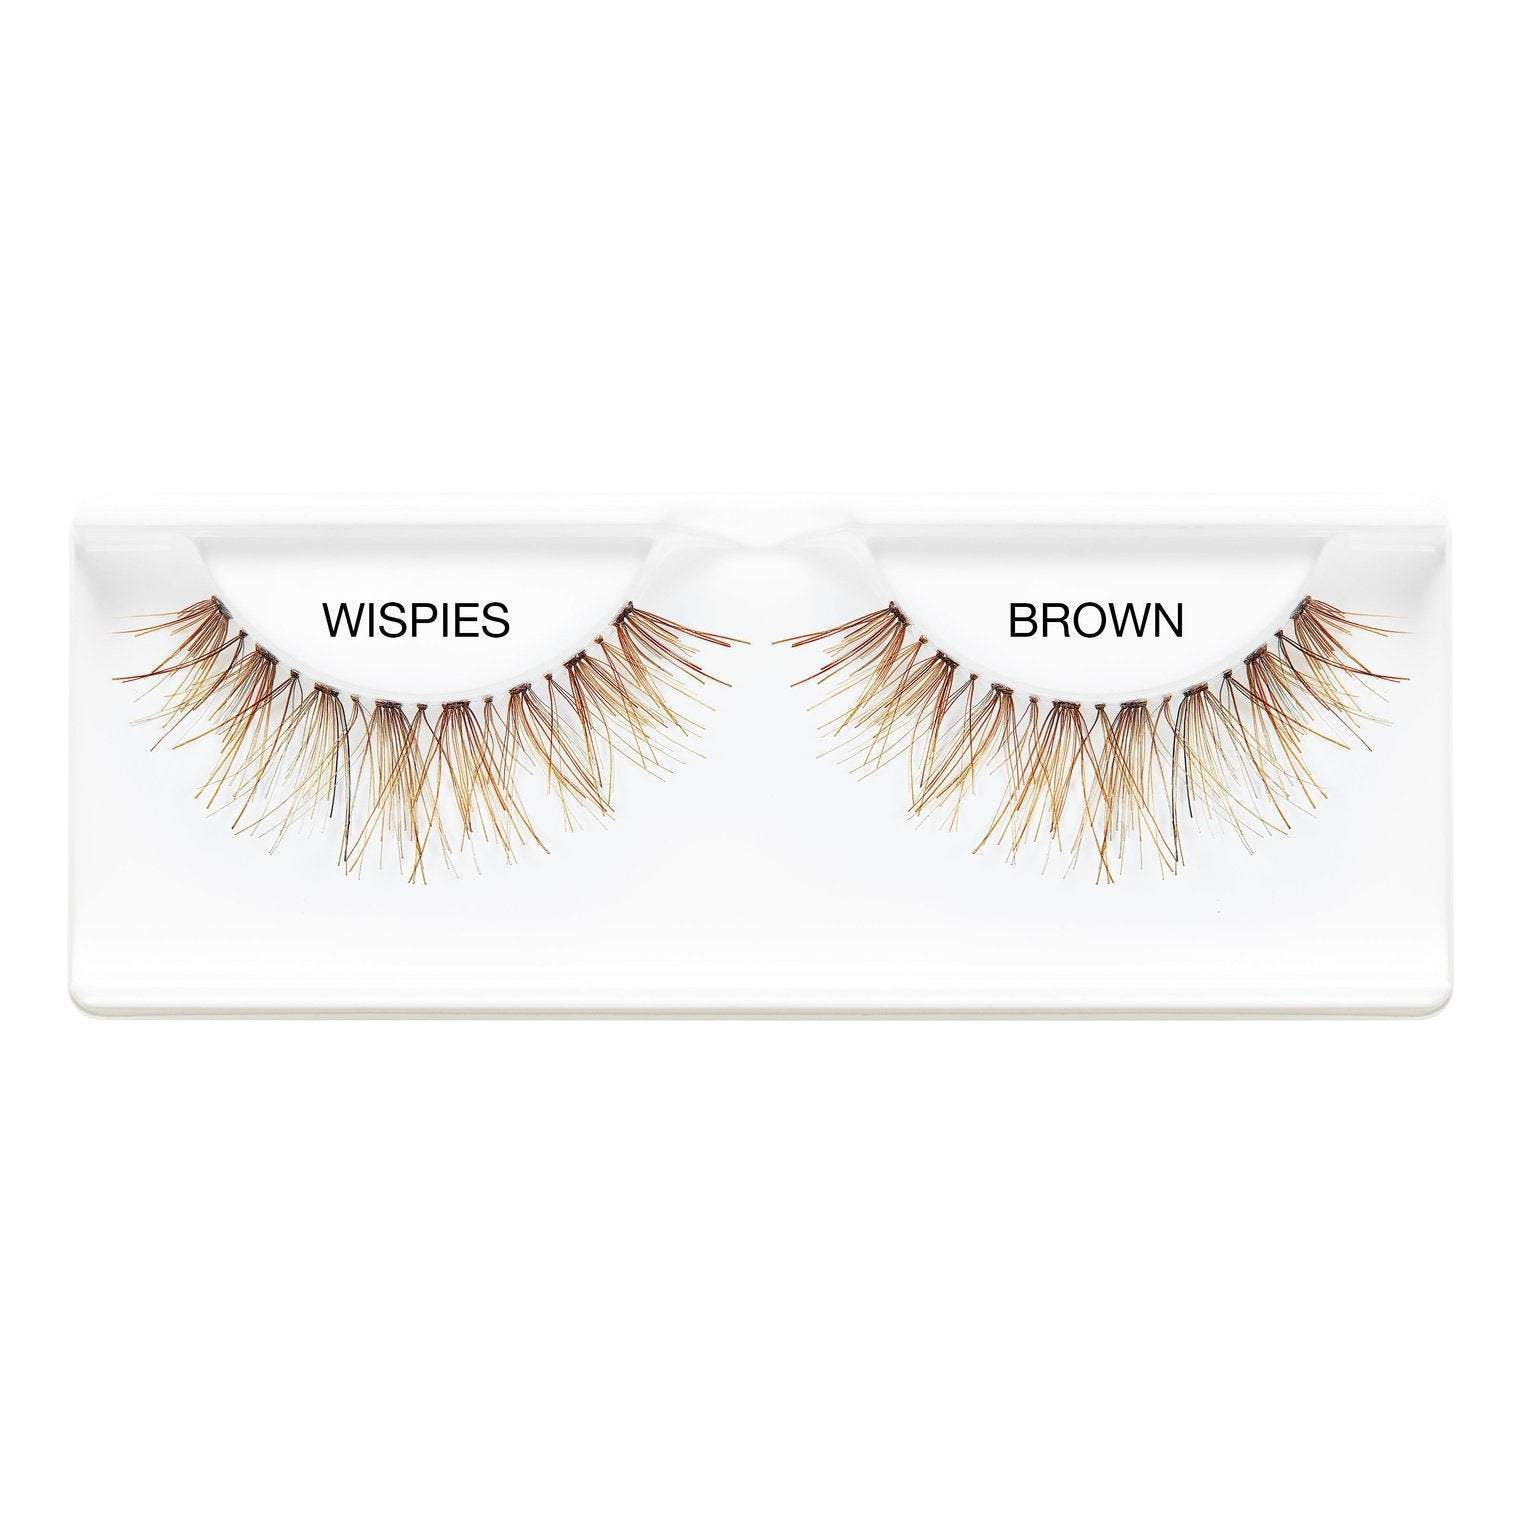 Ardell Wispies Brown-Ardell-ARD_Wispies,Brand_Ardell,Collection_Makeup,Makeup_Eye,Makeup_Faux Lashes